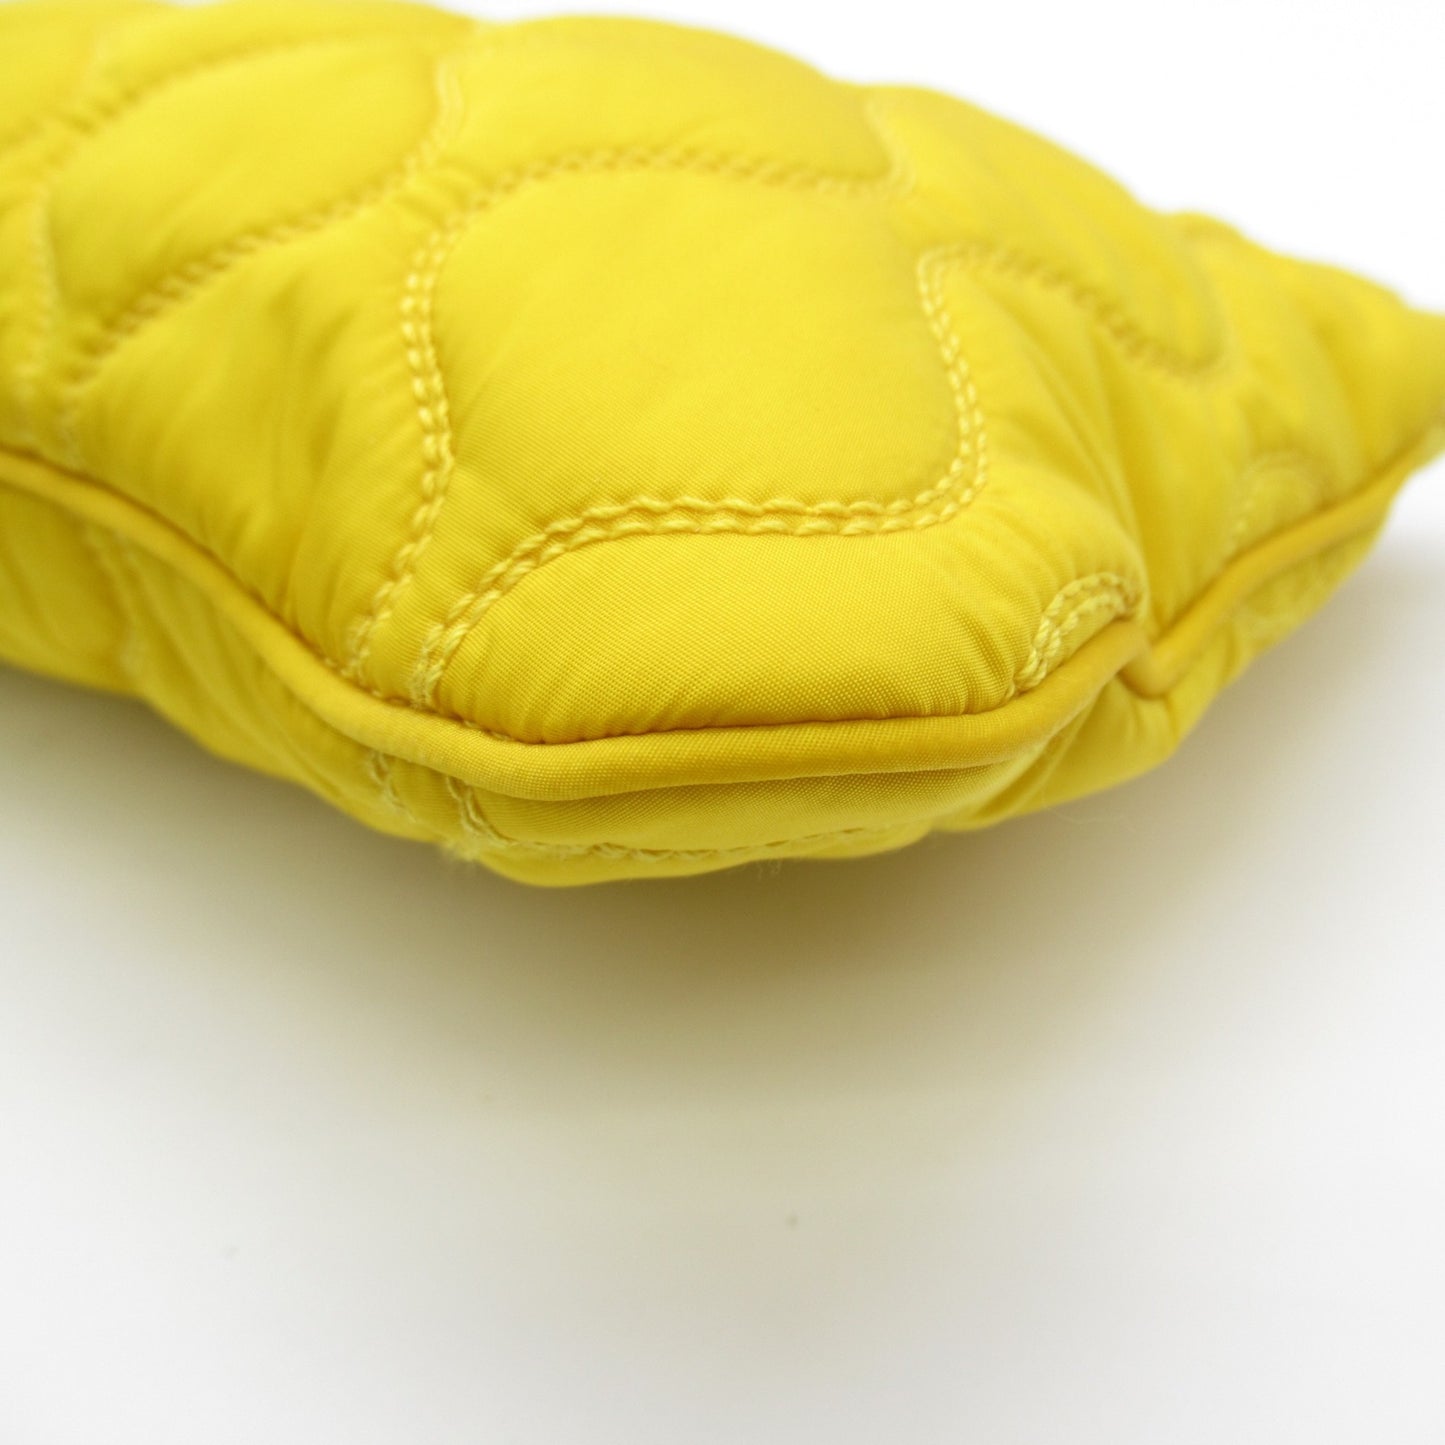 Miu Miu Women's Exquisite Synthetic Yellow Clutch from Renowned Designer in Yellow